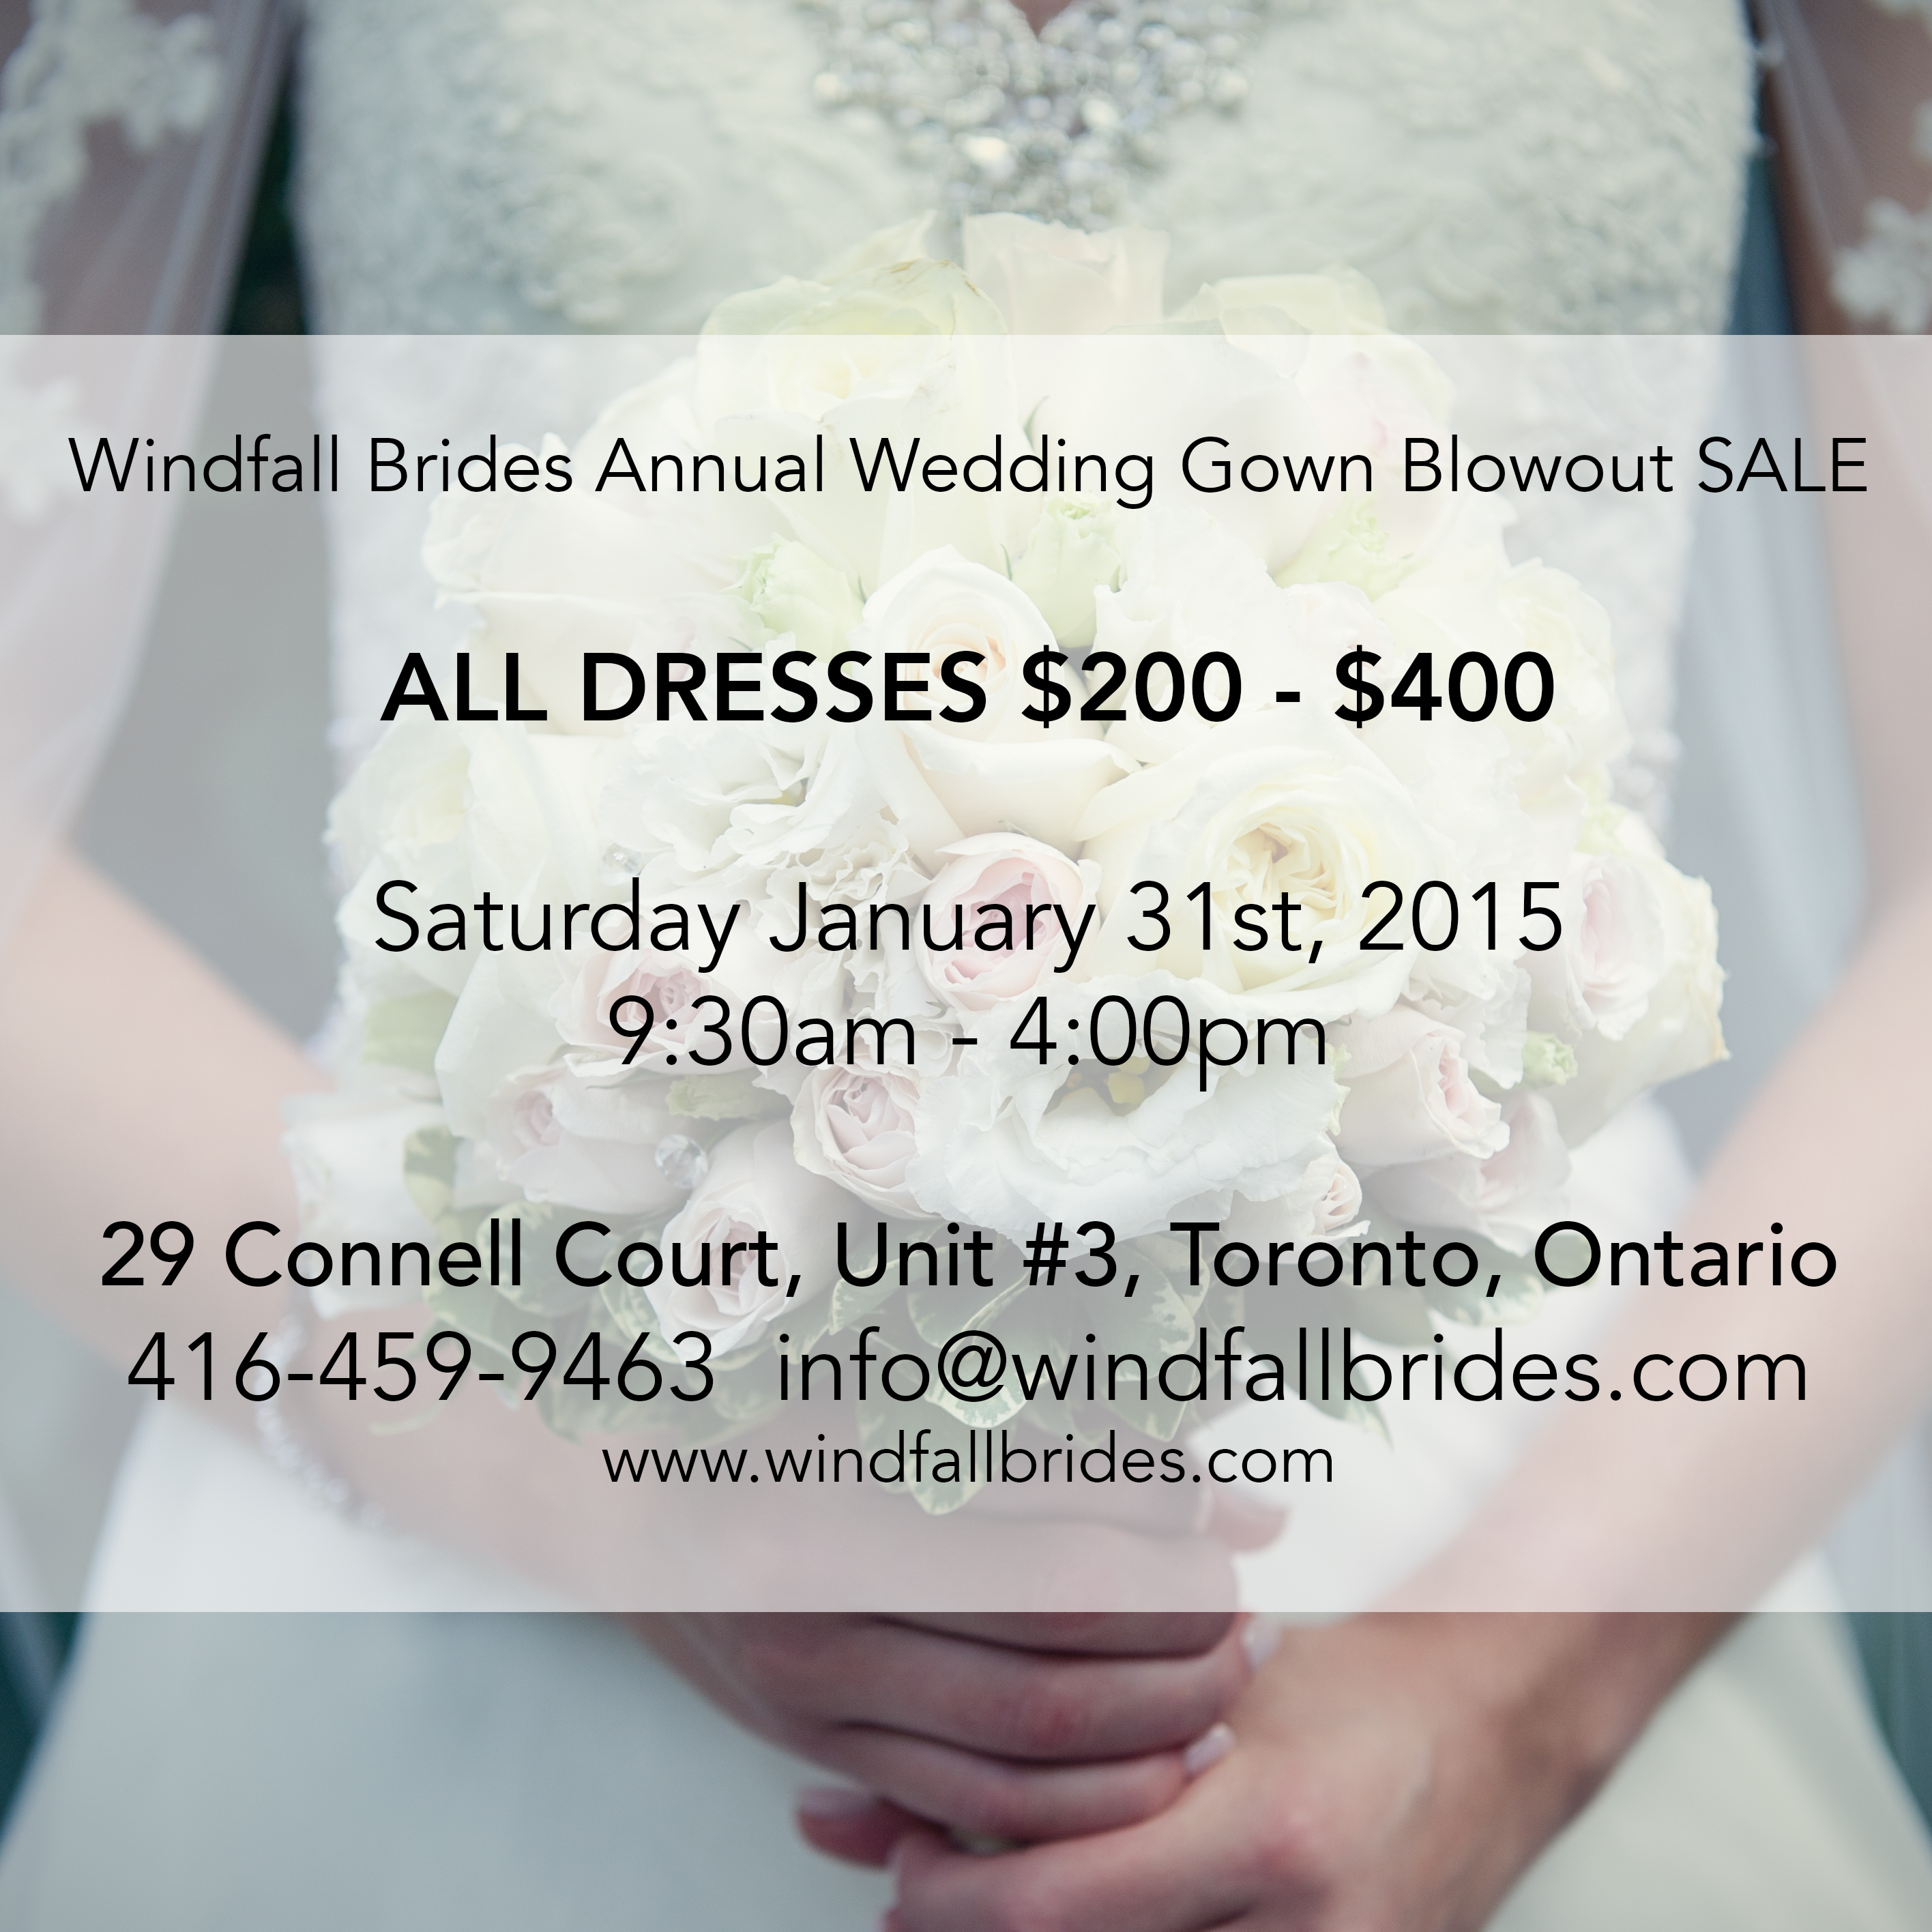  Annual  Wedding  Gown  Blowout Sale  Windfall Brides